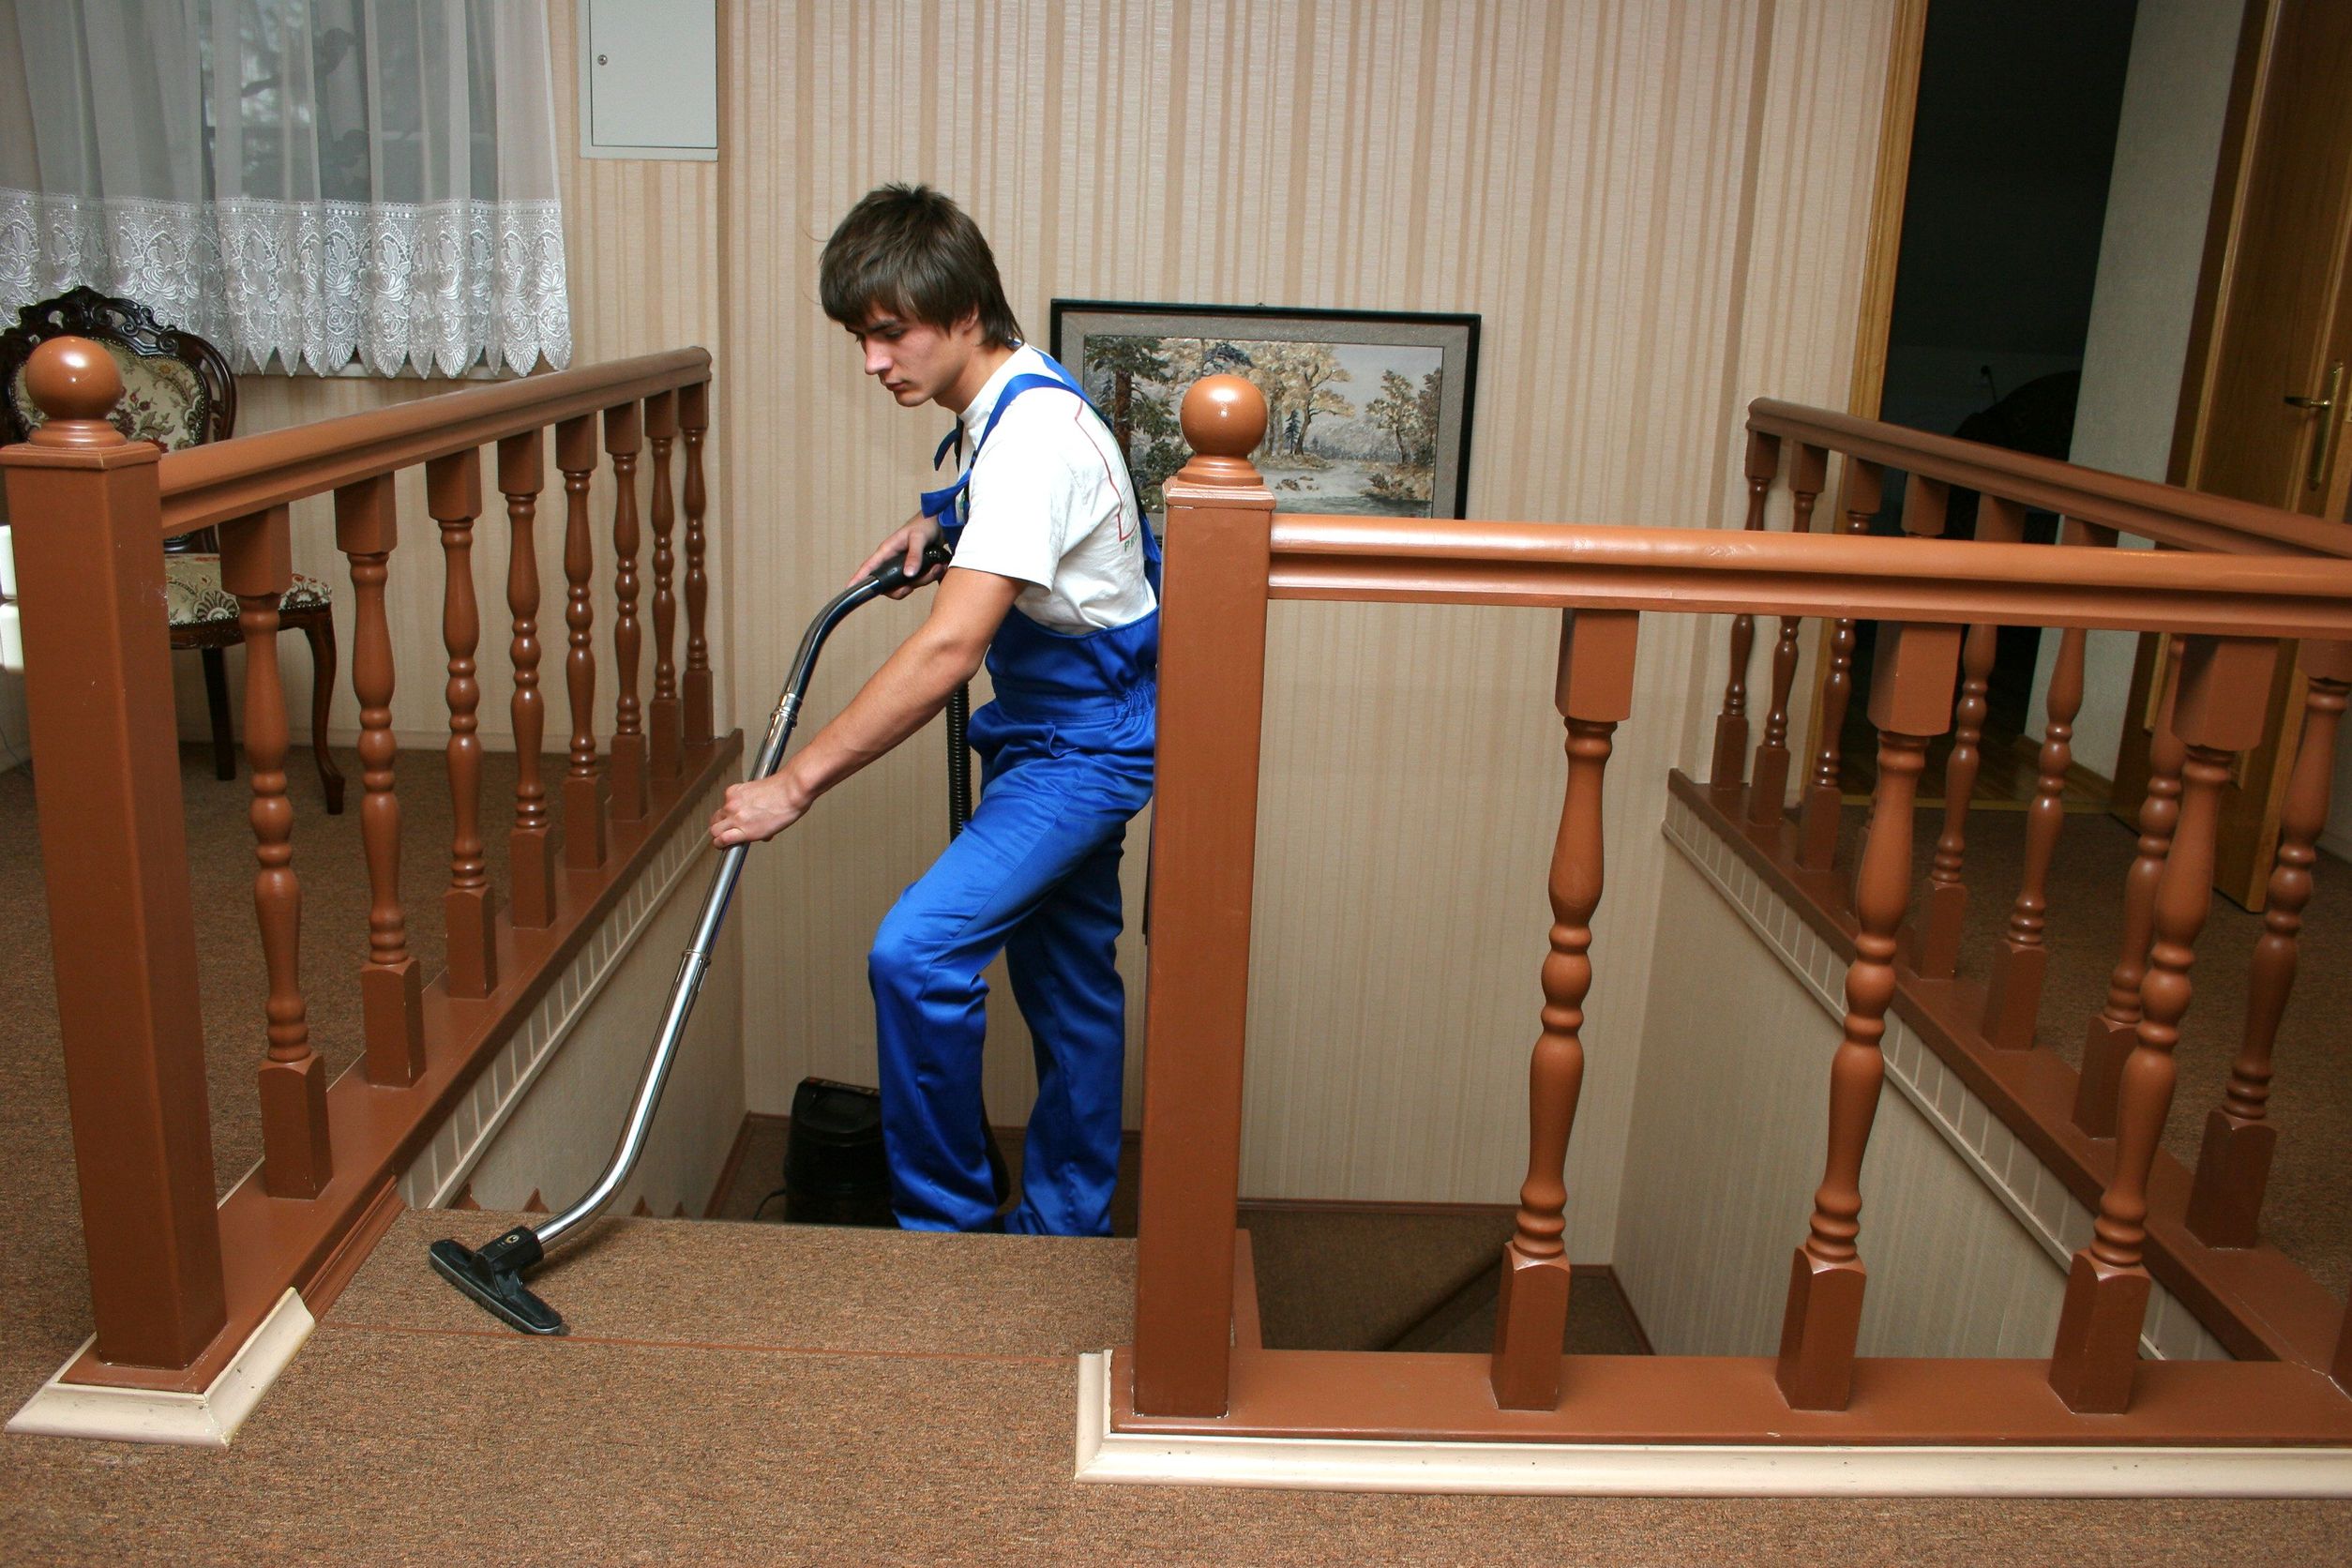 Carpet Cleaning Services in Raleigh NC Remove Allergens and Dirt